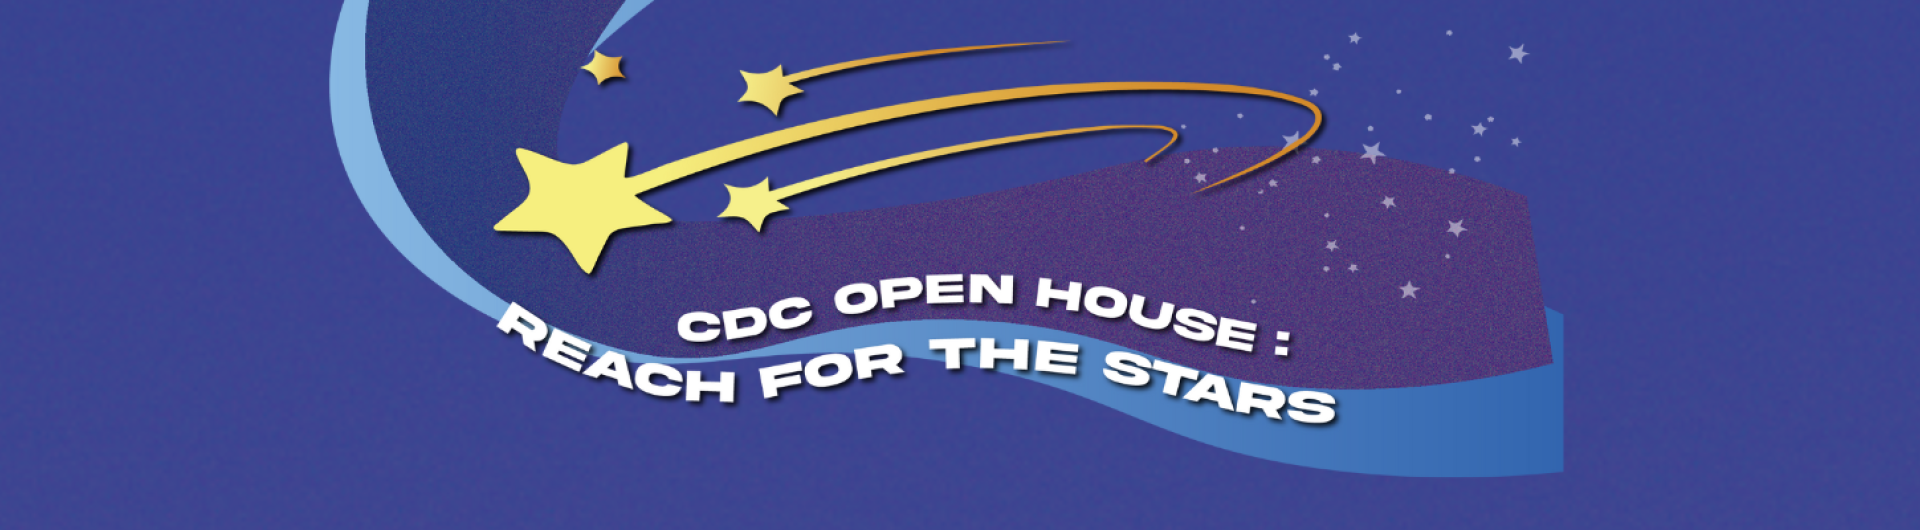 cdc open house: reach for the stars